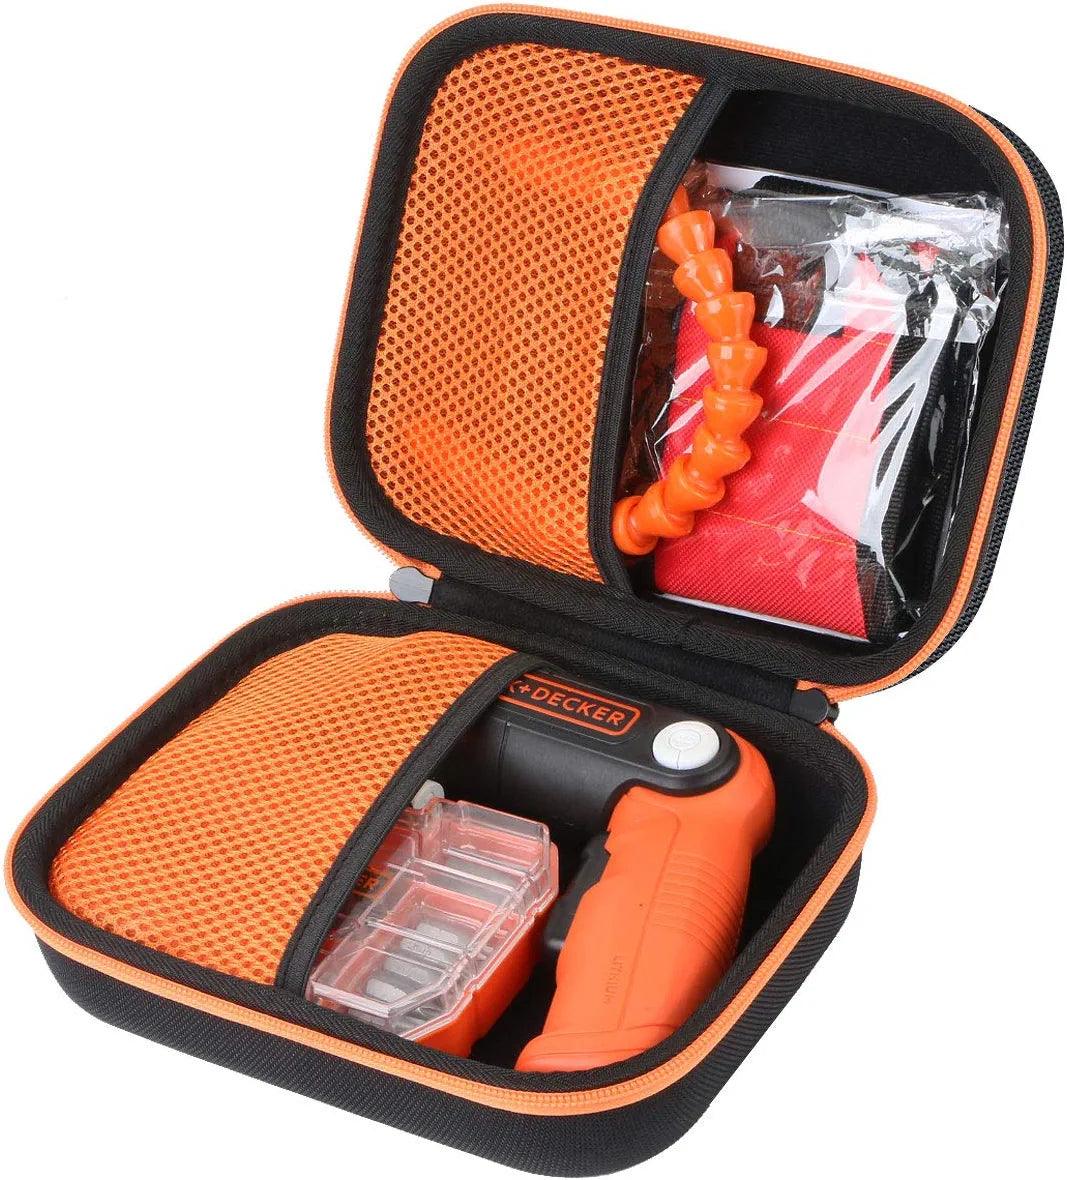 Hard Carrying Case Replacement for BLACK+DECKER BDCSFL20C 4V MAX Cordless Screwdriver